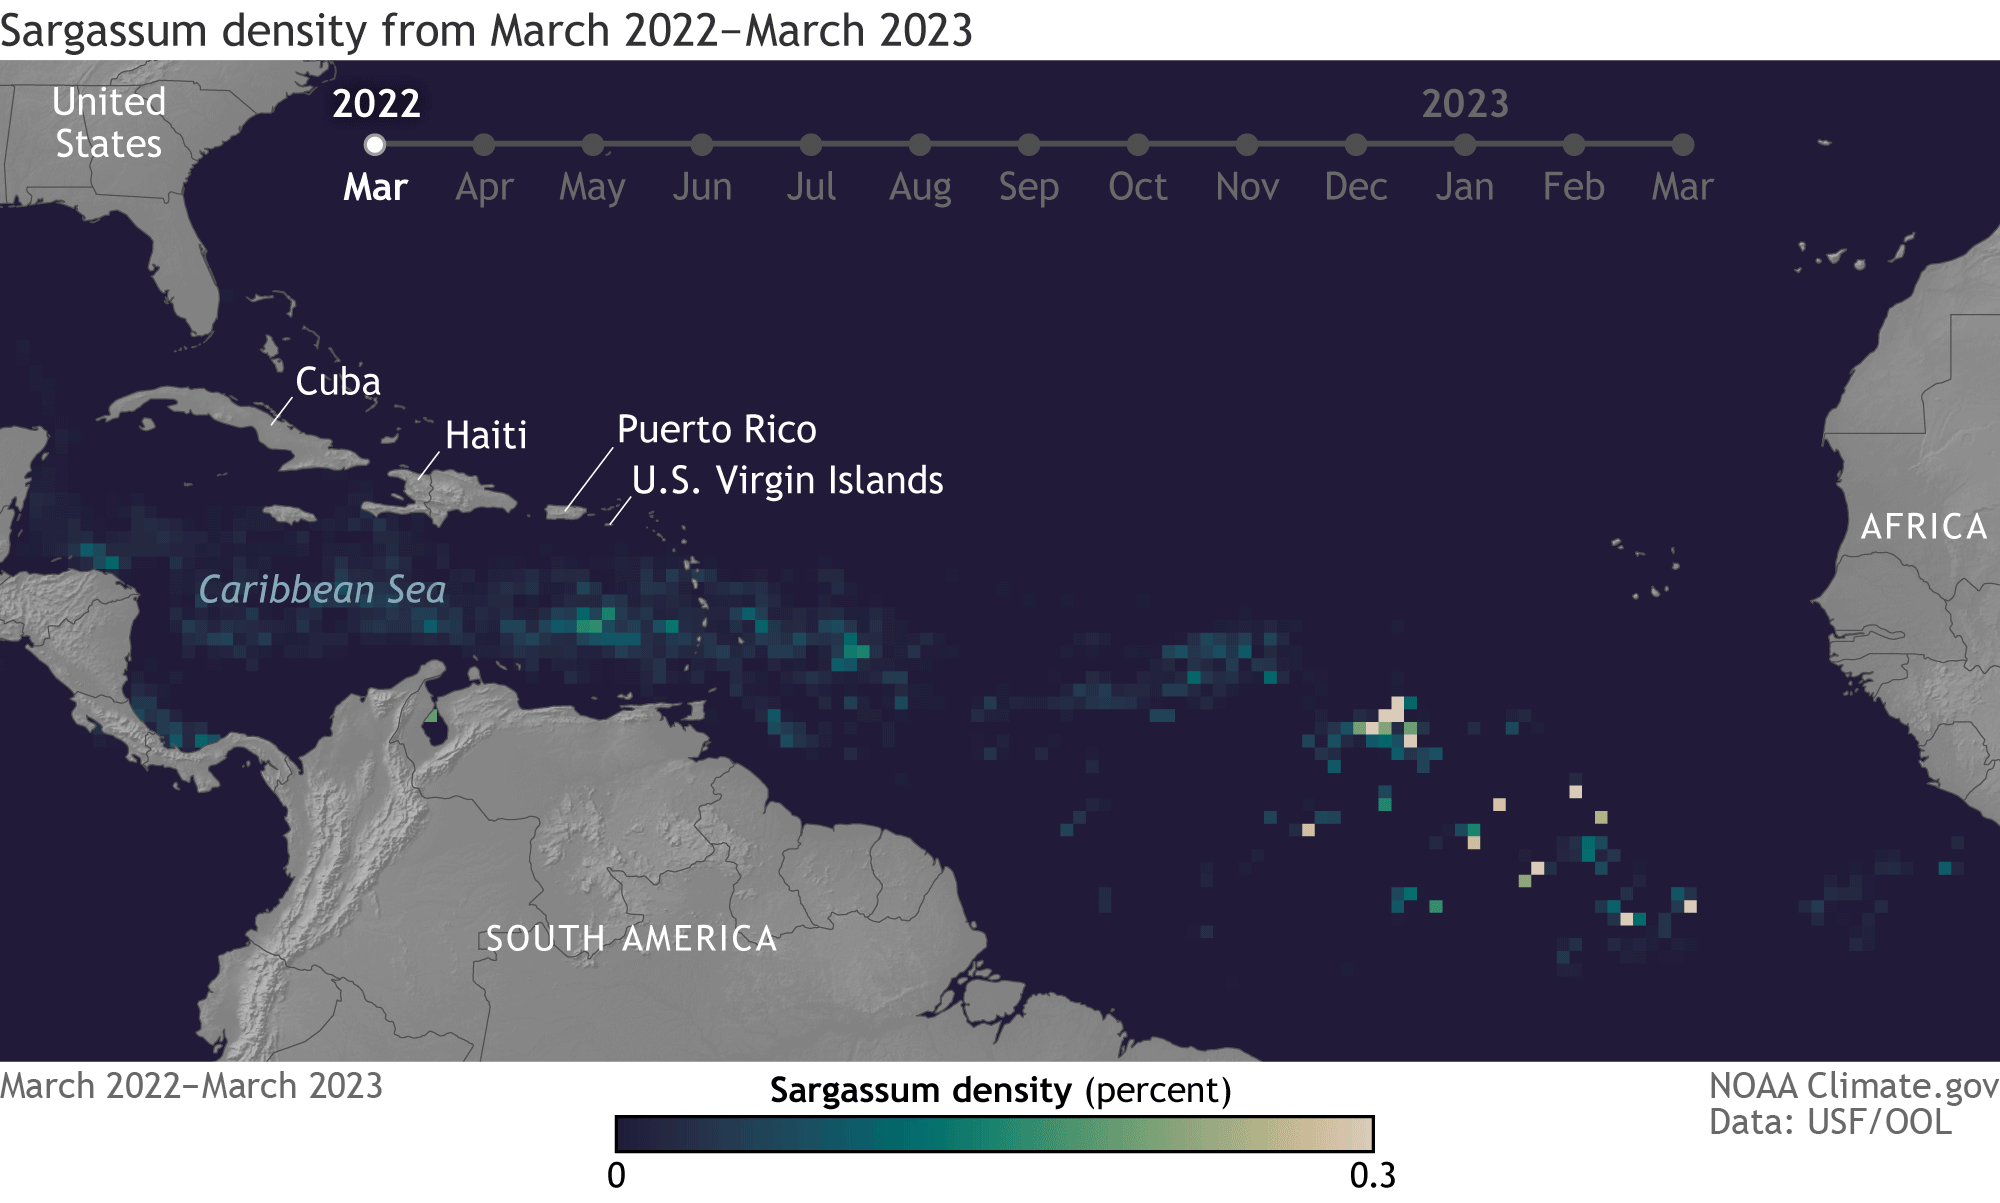 Monthly maps of Sargassum seaweed density from March 2022 to March 2023